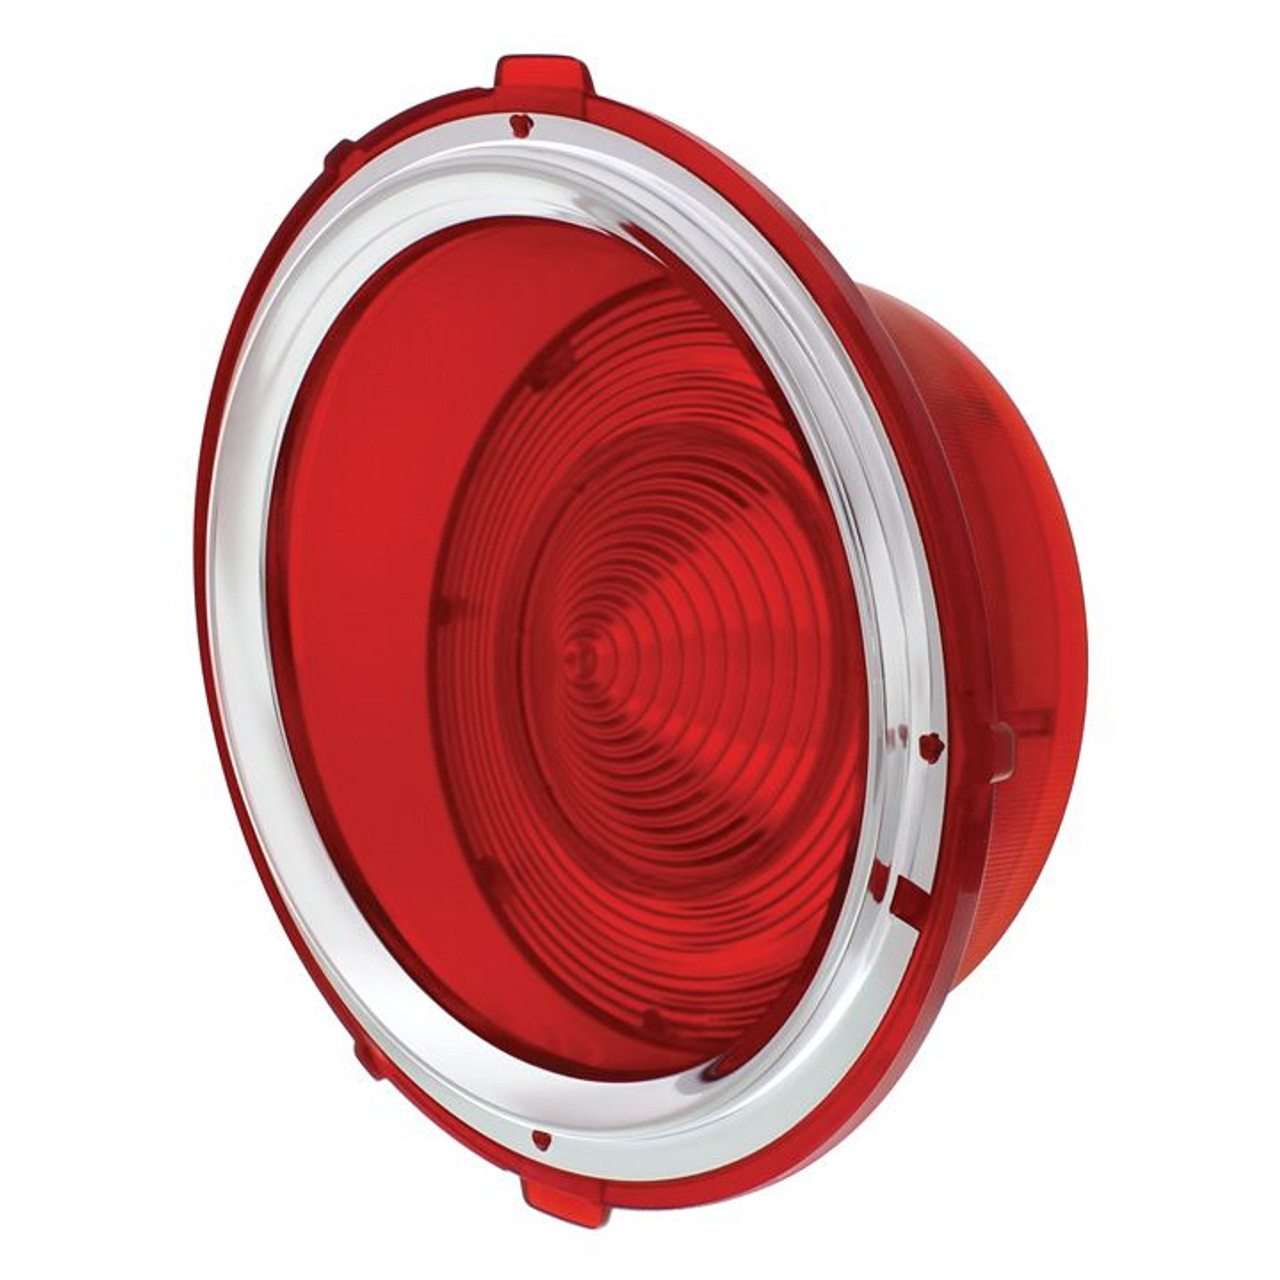 United Pacific Tail Light Lens for 1970-73 Chevy Camaro - R/H